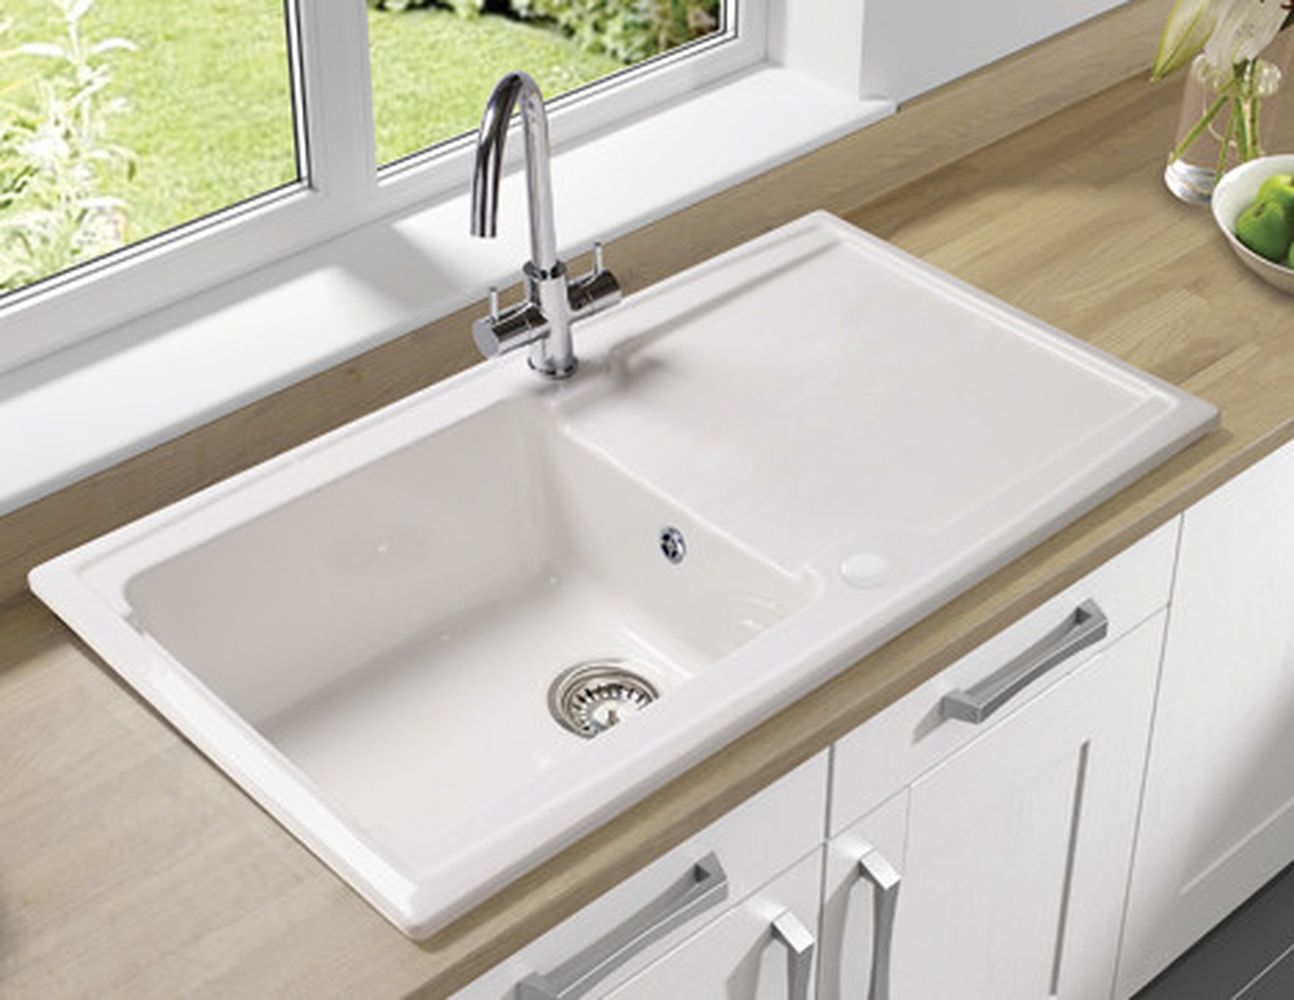 Image of Wickes Contemporary 1 Bowl Ceramic Kitchen Sink - White